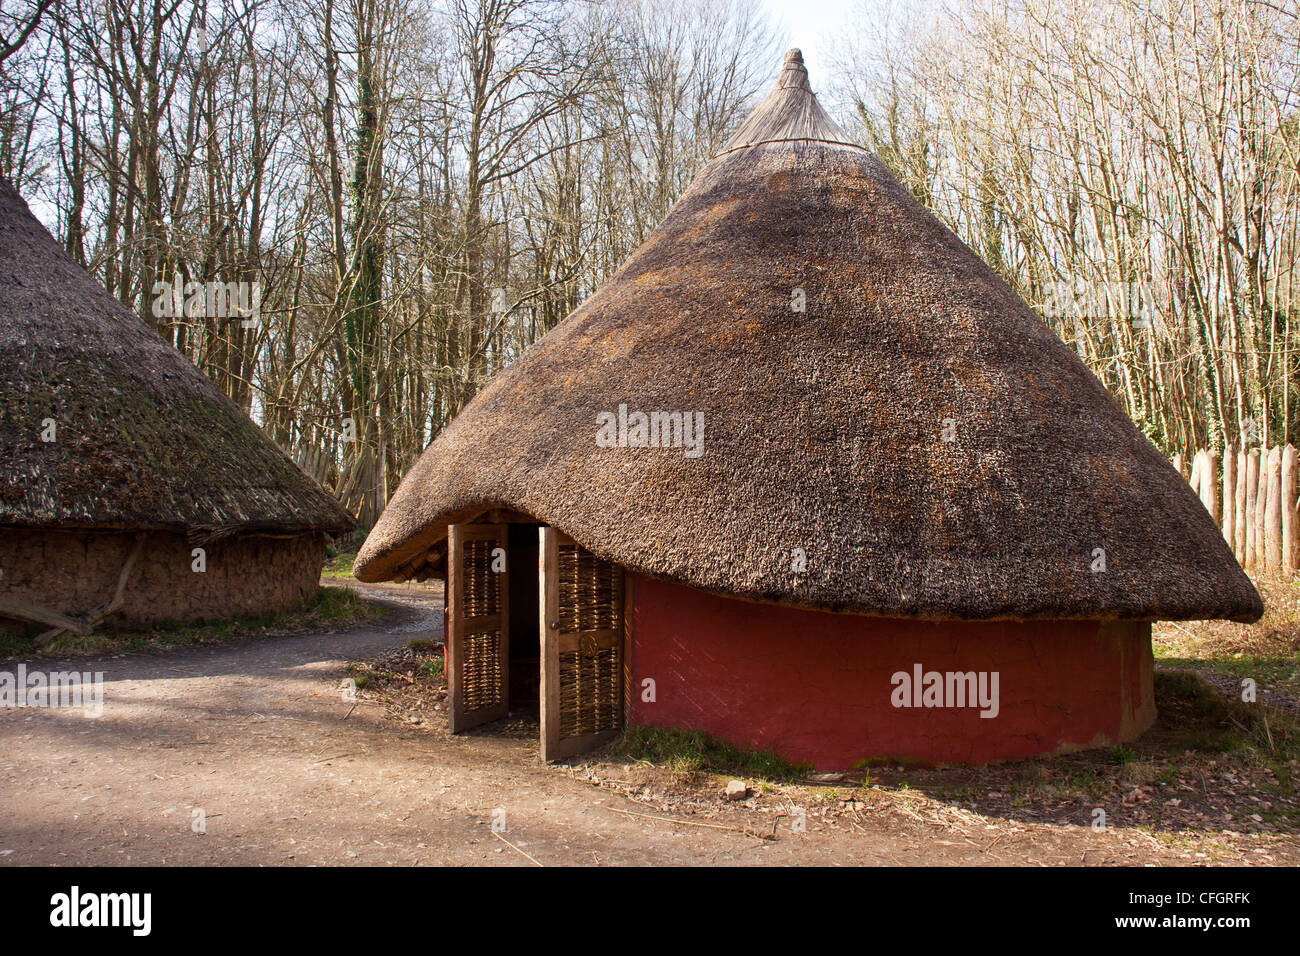 bronze age celtic village,round house huts in welsh bronze age hamlet,pagan celtic habitat,welsh village,bronze age,thatched roo Stock Photo